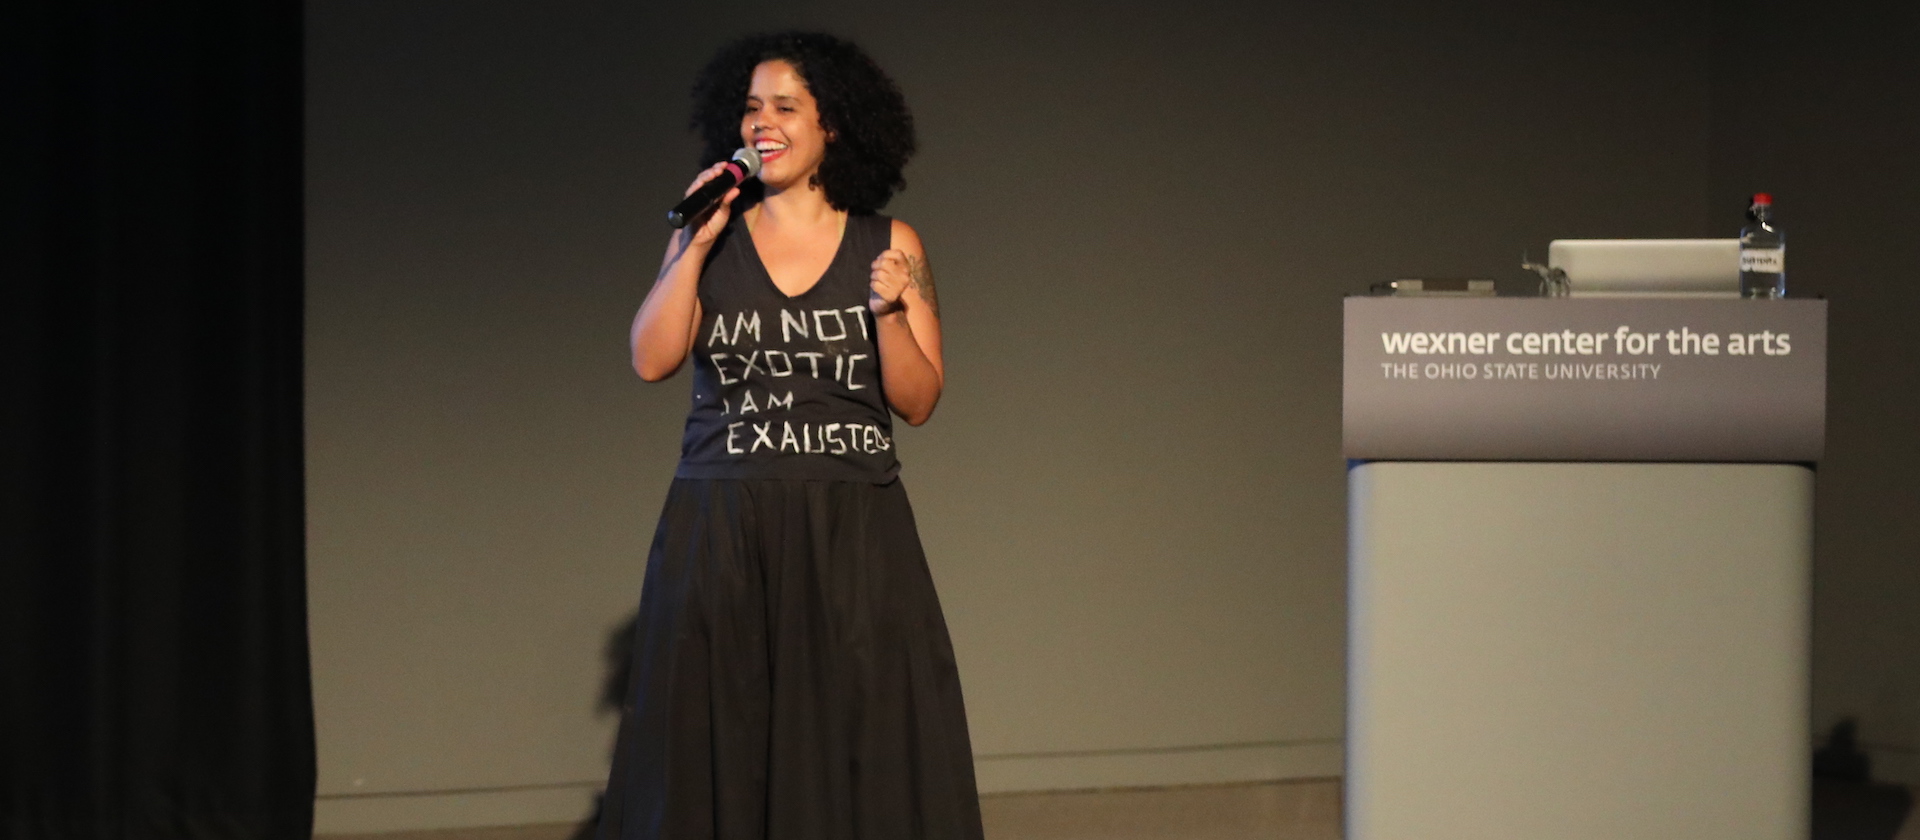 Performance choreographer Awilda Rodriguez Lora during an artist talk at the Wexner Center for the Arts at The Ohio State University on March 5, 2019